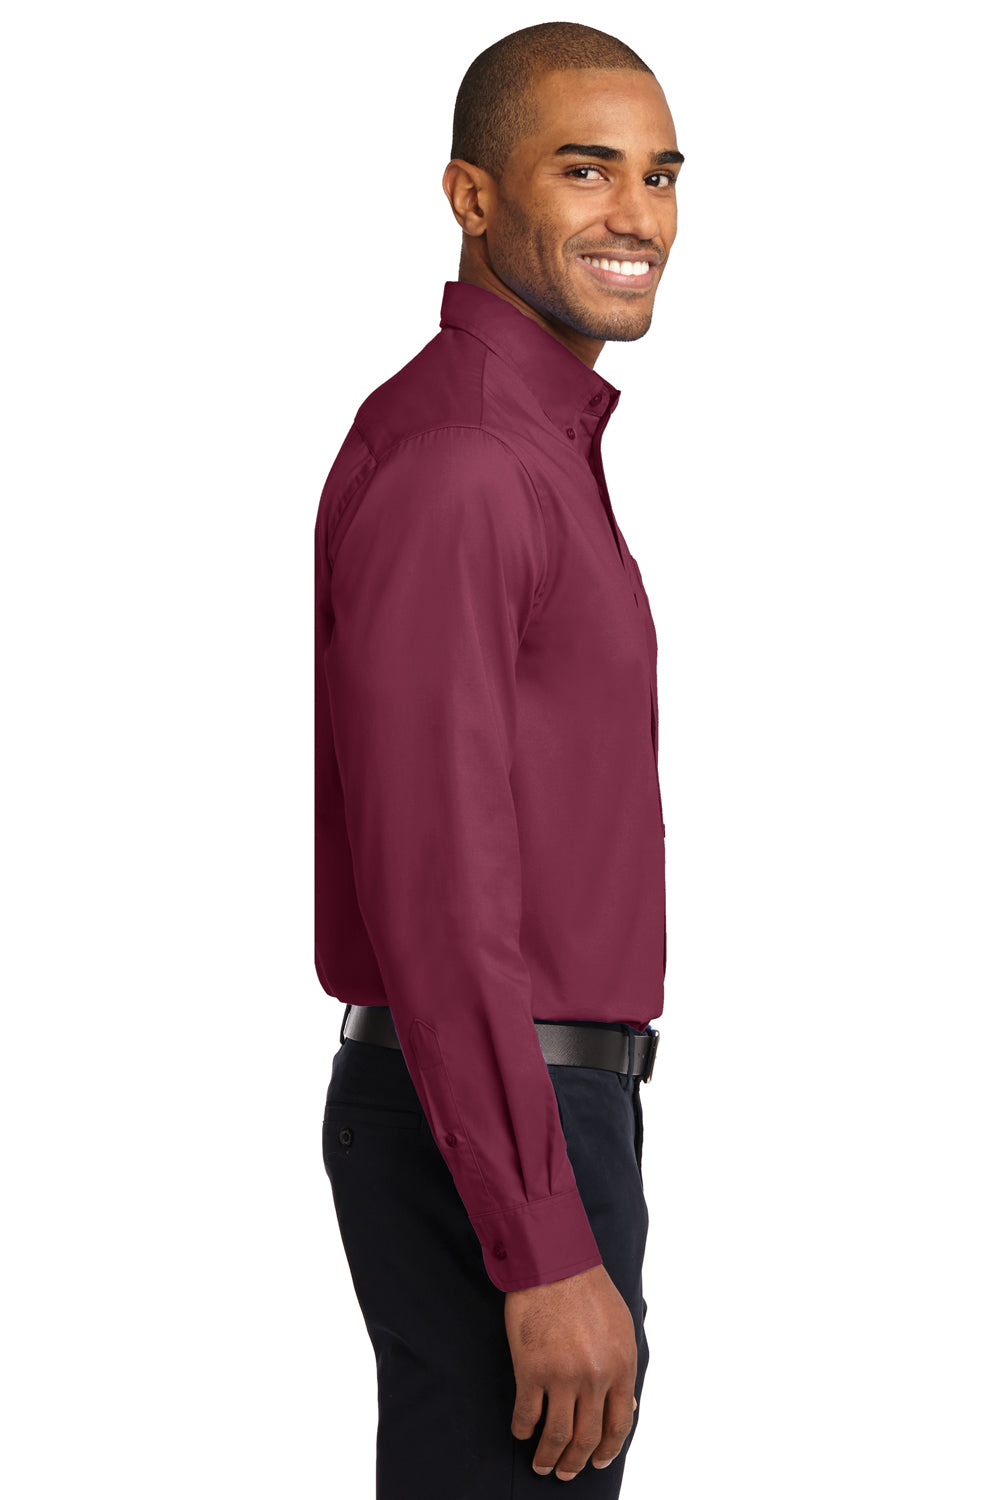 Port Authority Mens Easy Care Wrinkle Resistant Long Sleeve Button Down  Shirt w/ Pocket - Burgundy